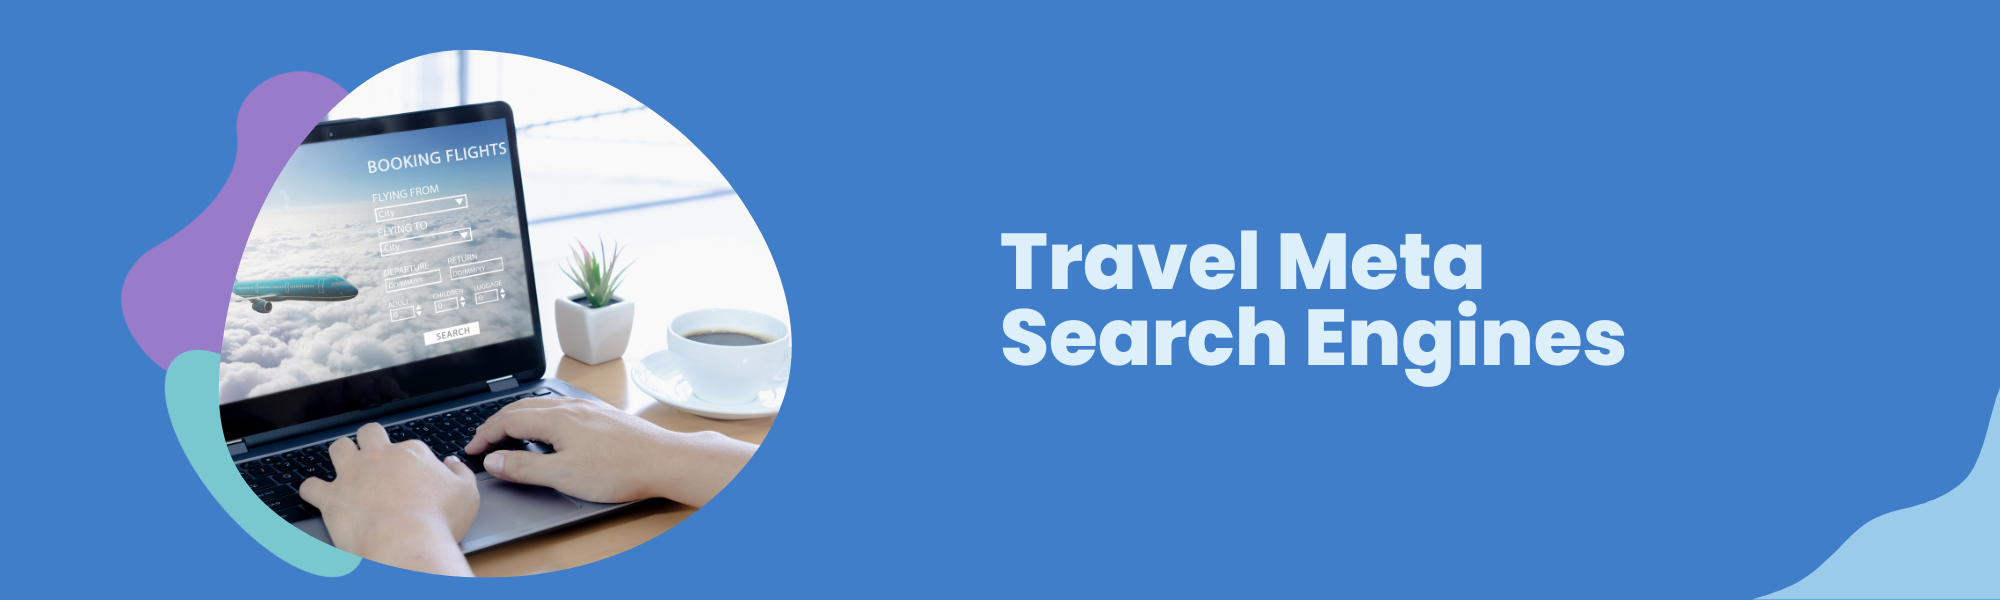 travel search engines best